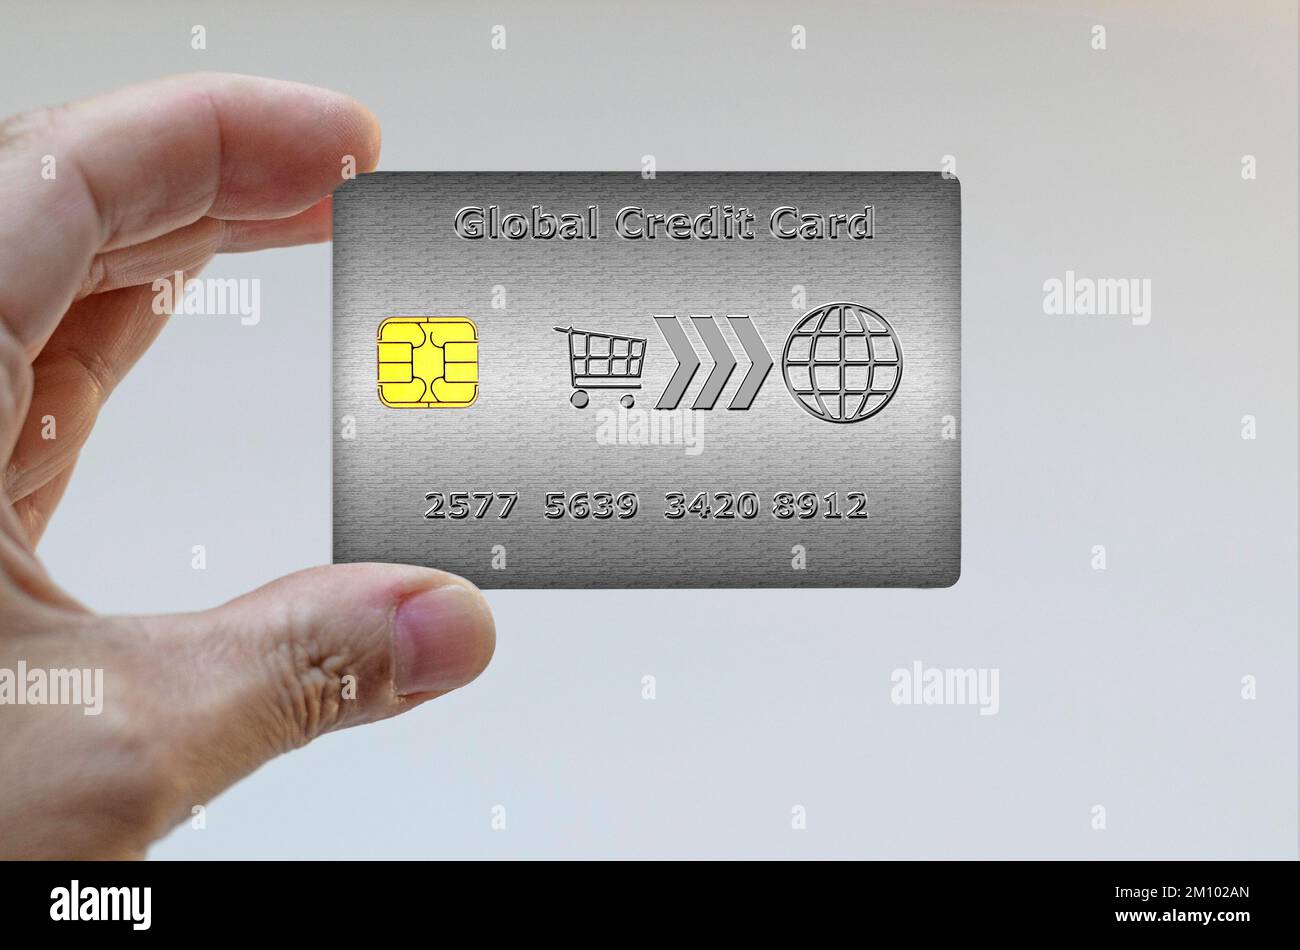 Hand holding a credit card Stock Photo